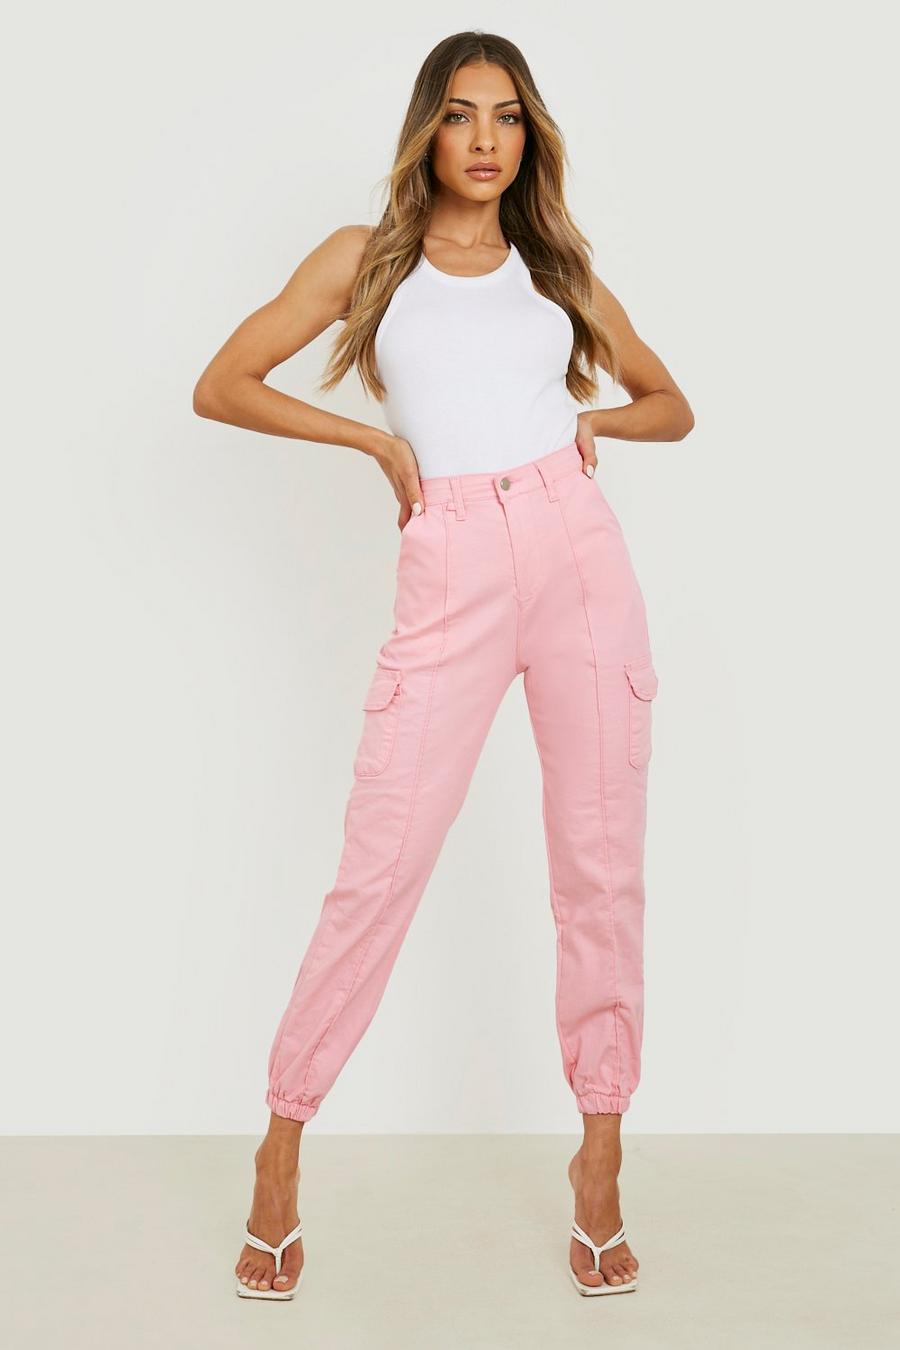 Pantaloni Cargo Casual con tasche laterali, Baby pink image number 1